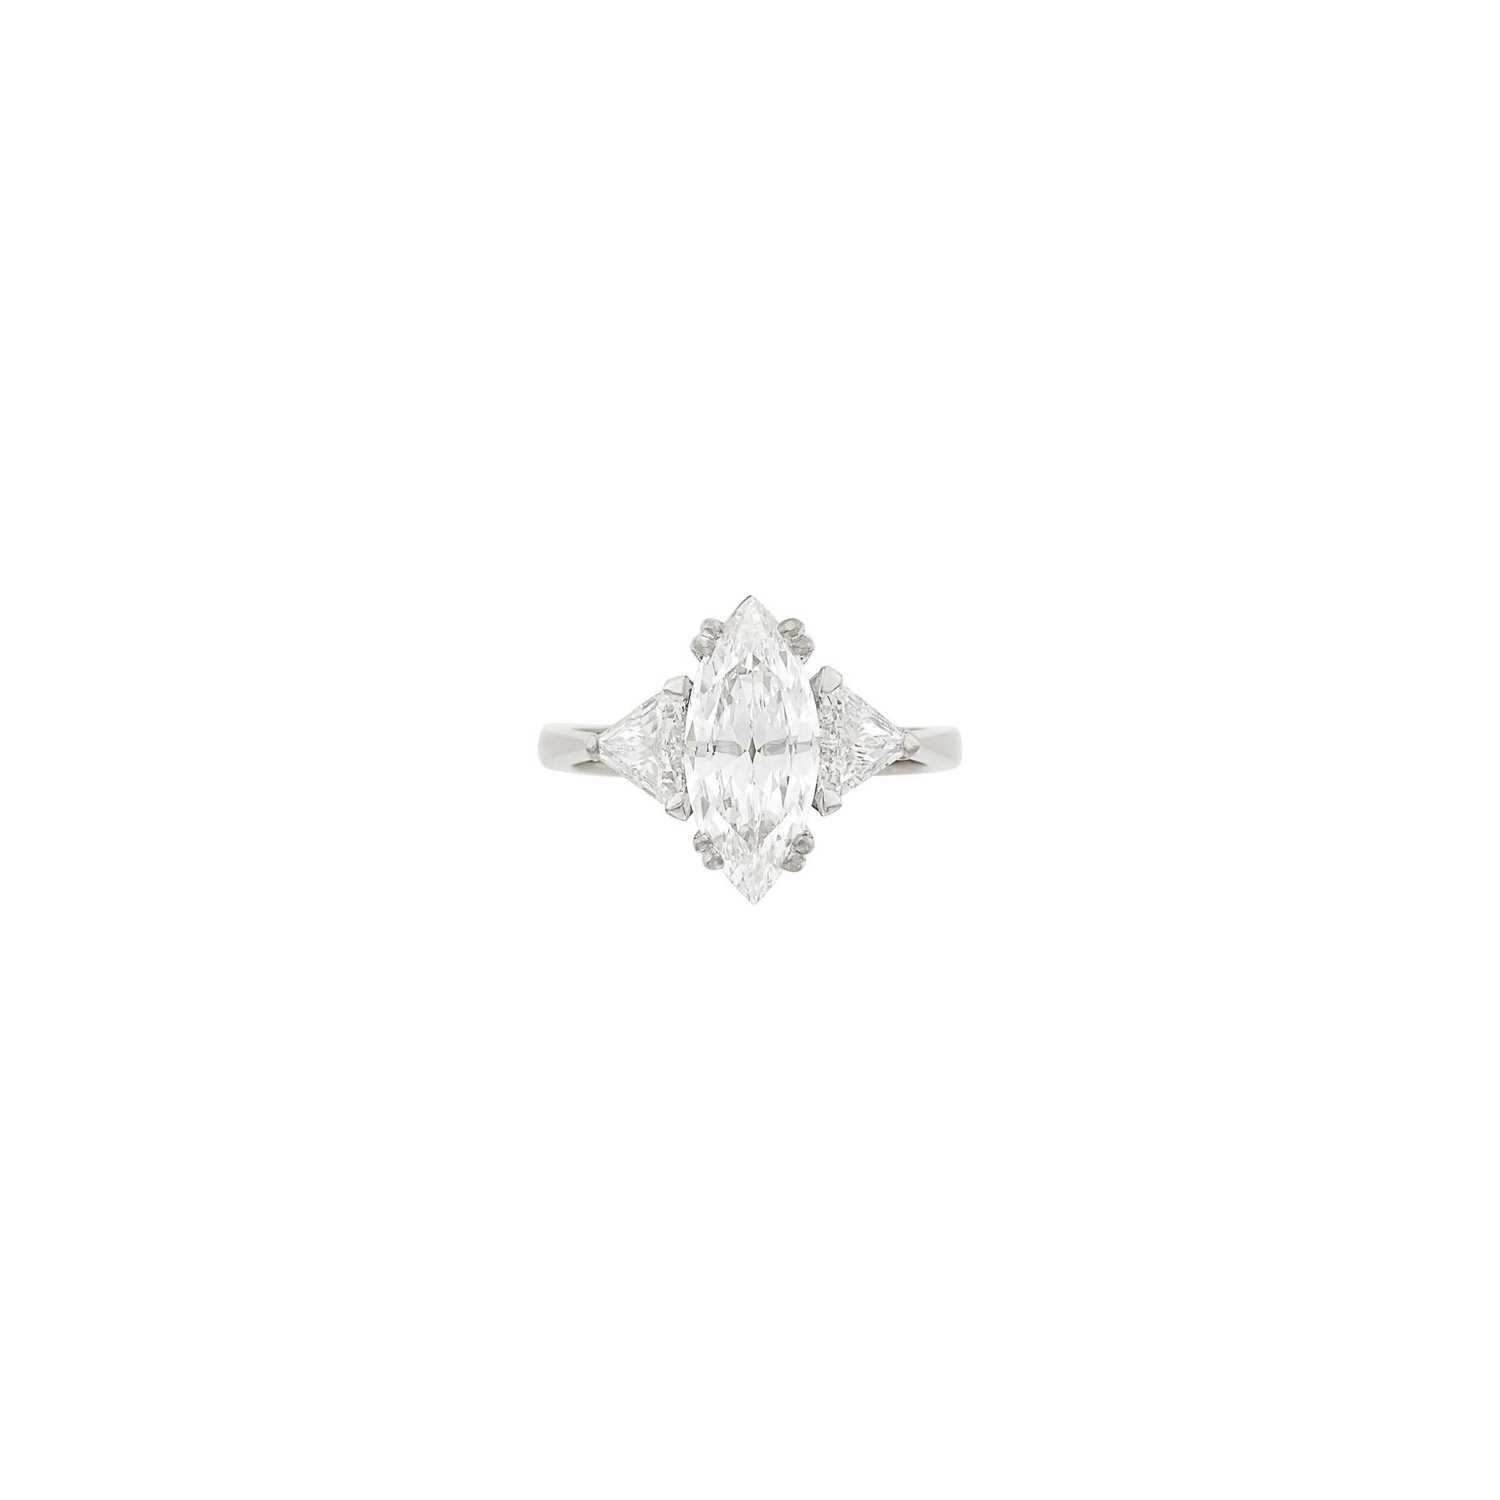 Lot 153 - White Gold and Diamond Ring